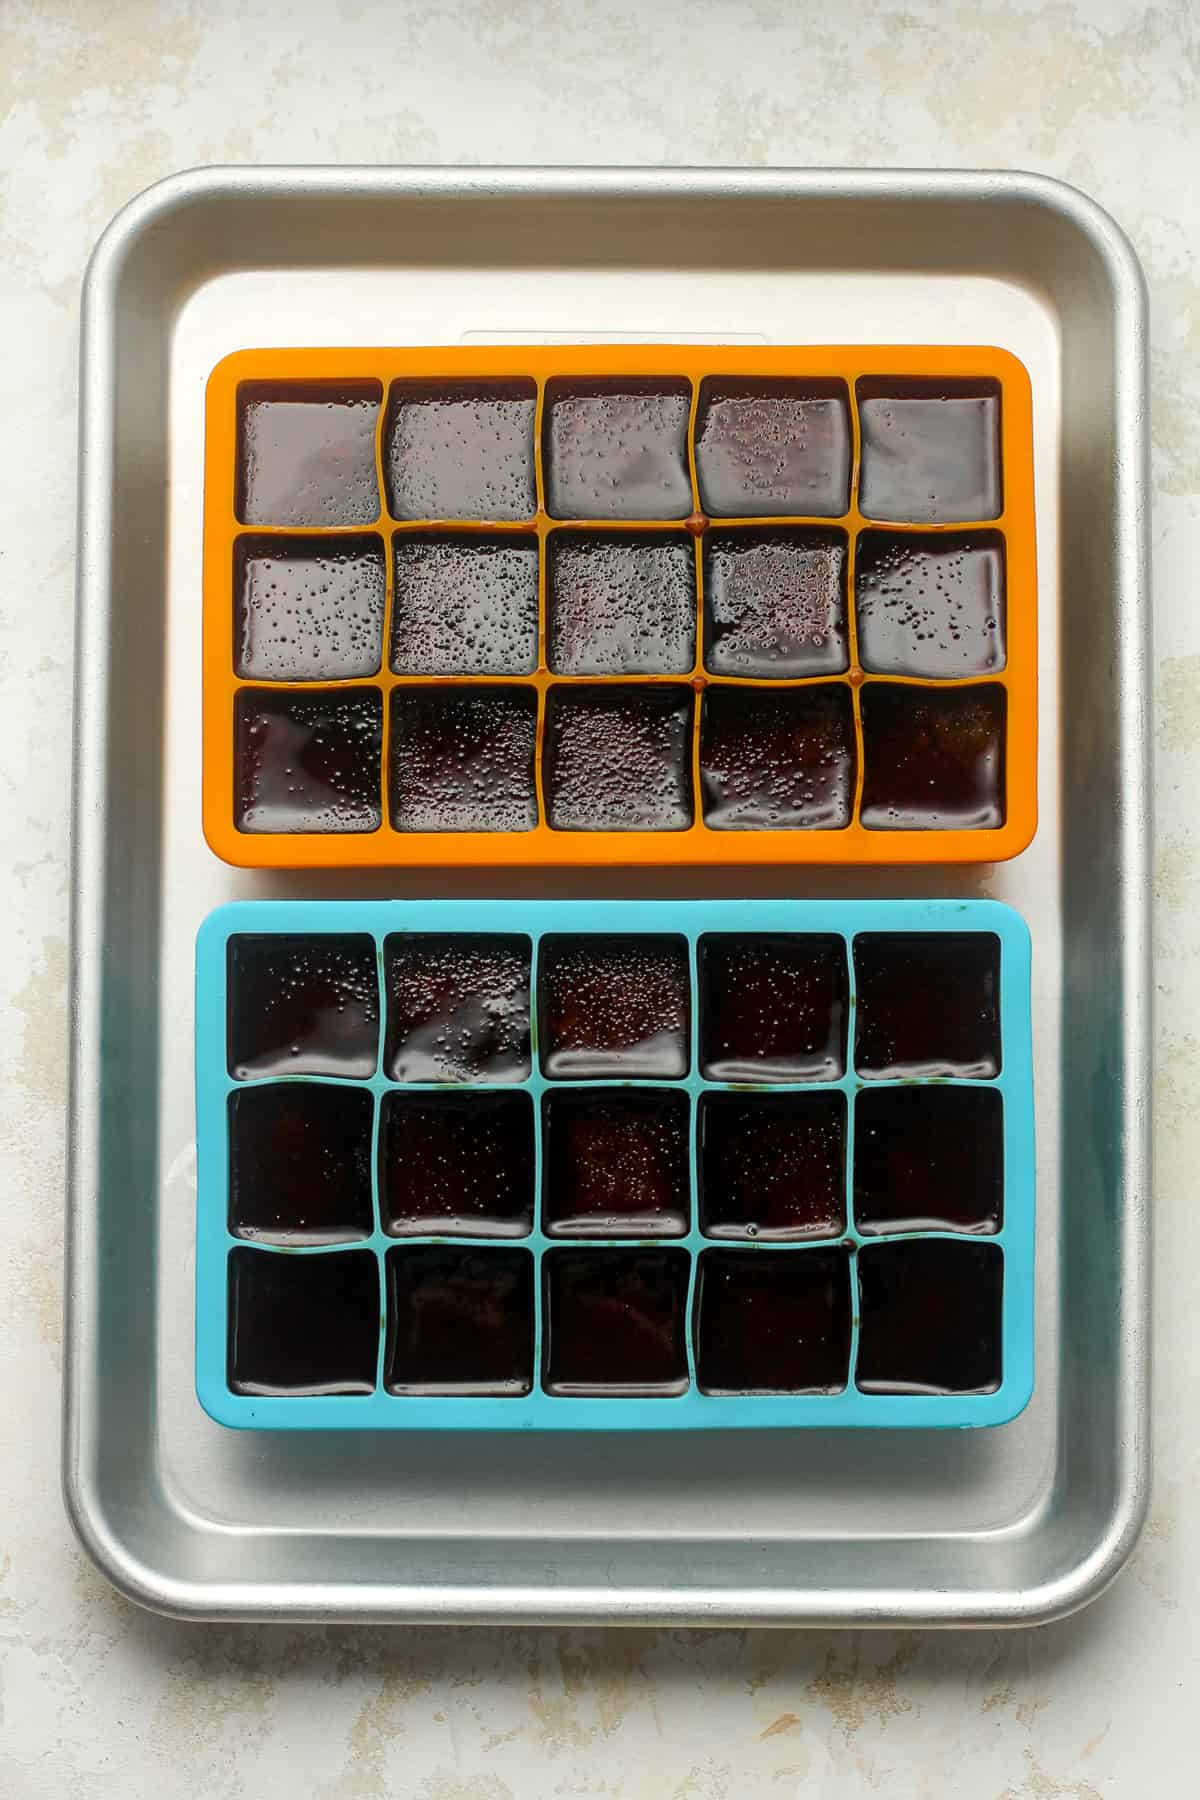 Two trays of coffee cubes.